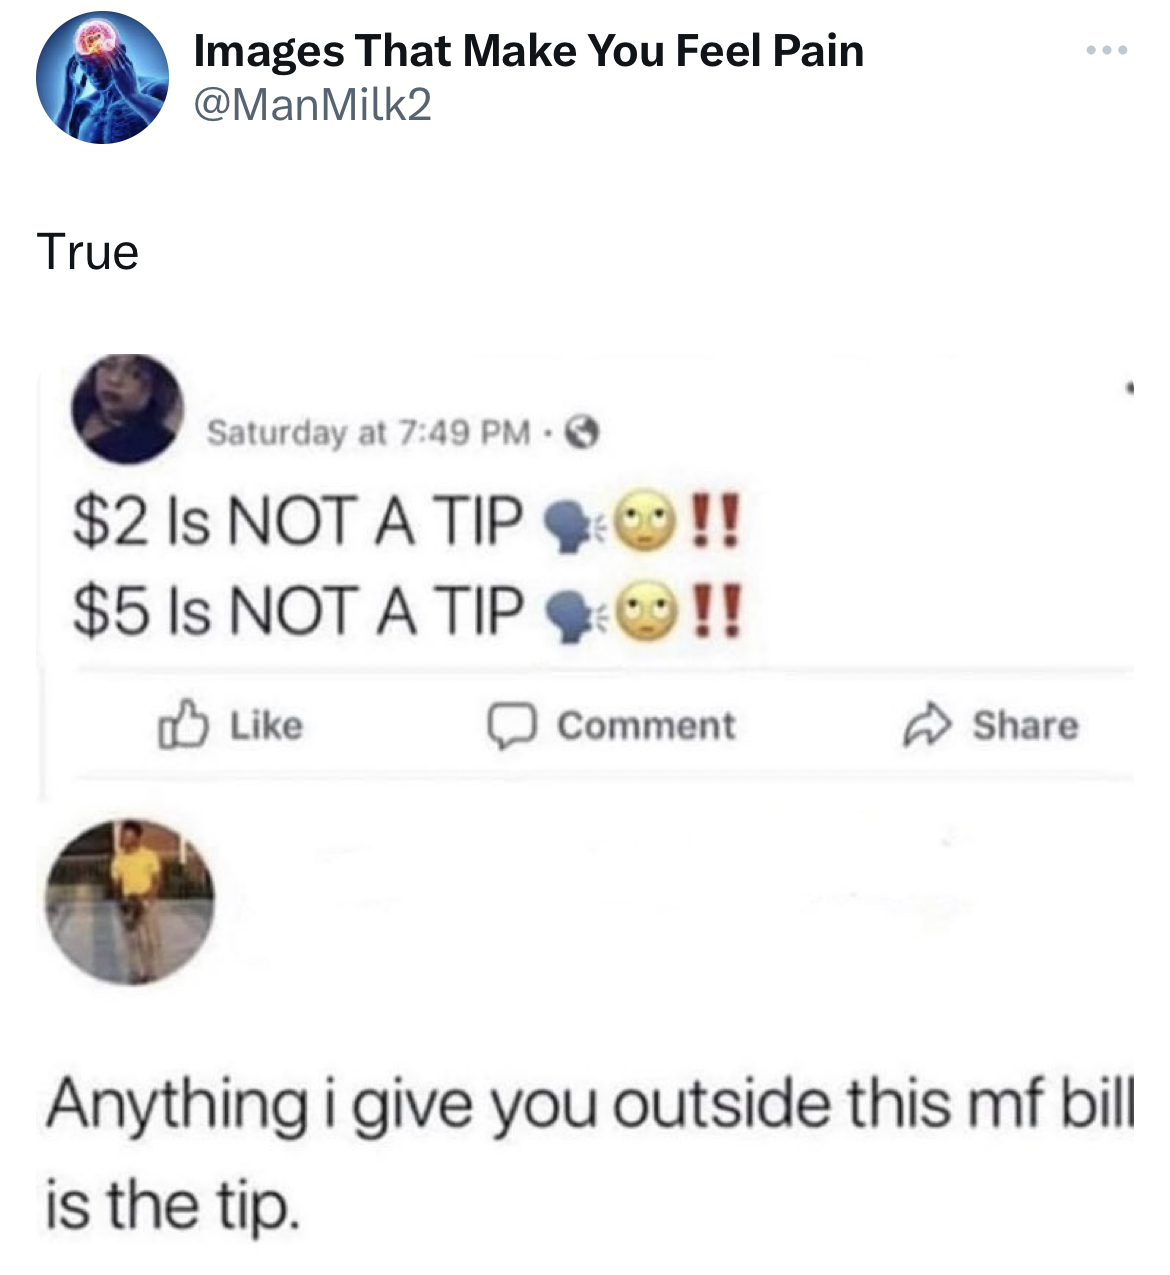 savage tweets - 2 dollars is not a tip - True Images That Make You Feel Pain Saturday at $2 Is Not A Tip $5 Is Not A Tip !! Comment Anything i give you outside this mf bill is the tip.